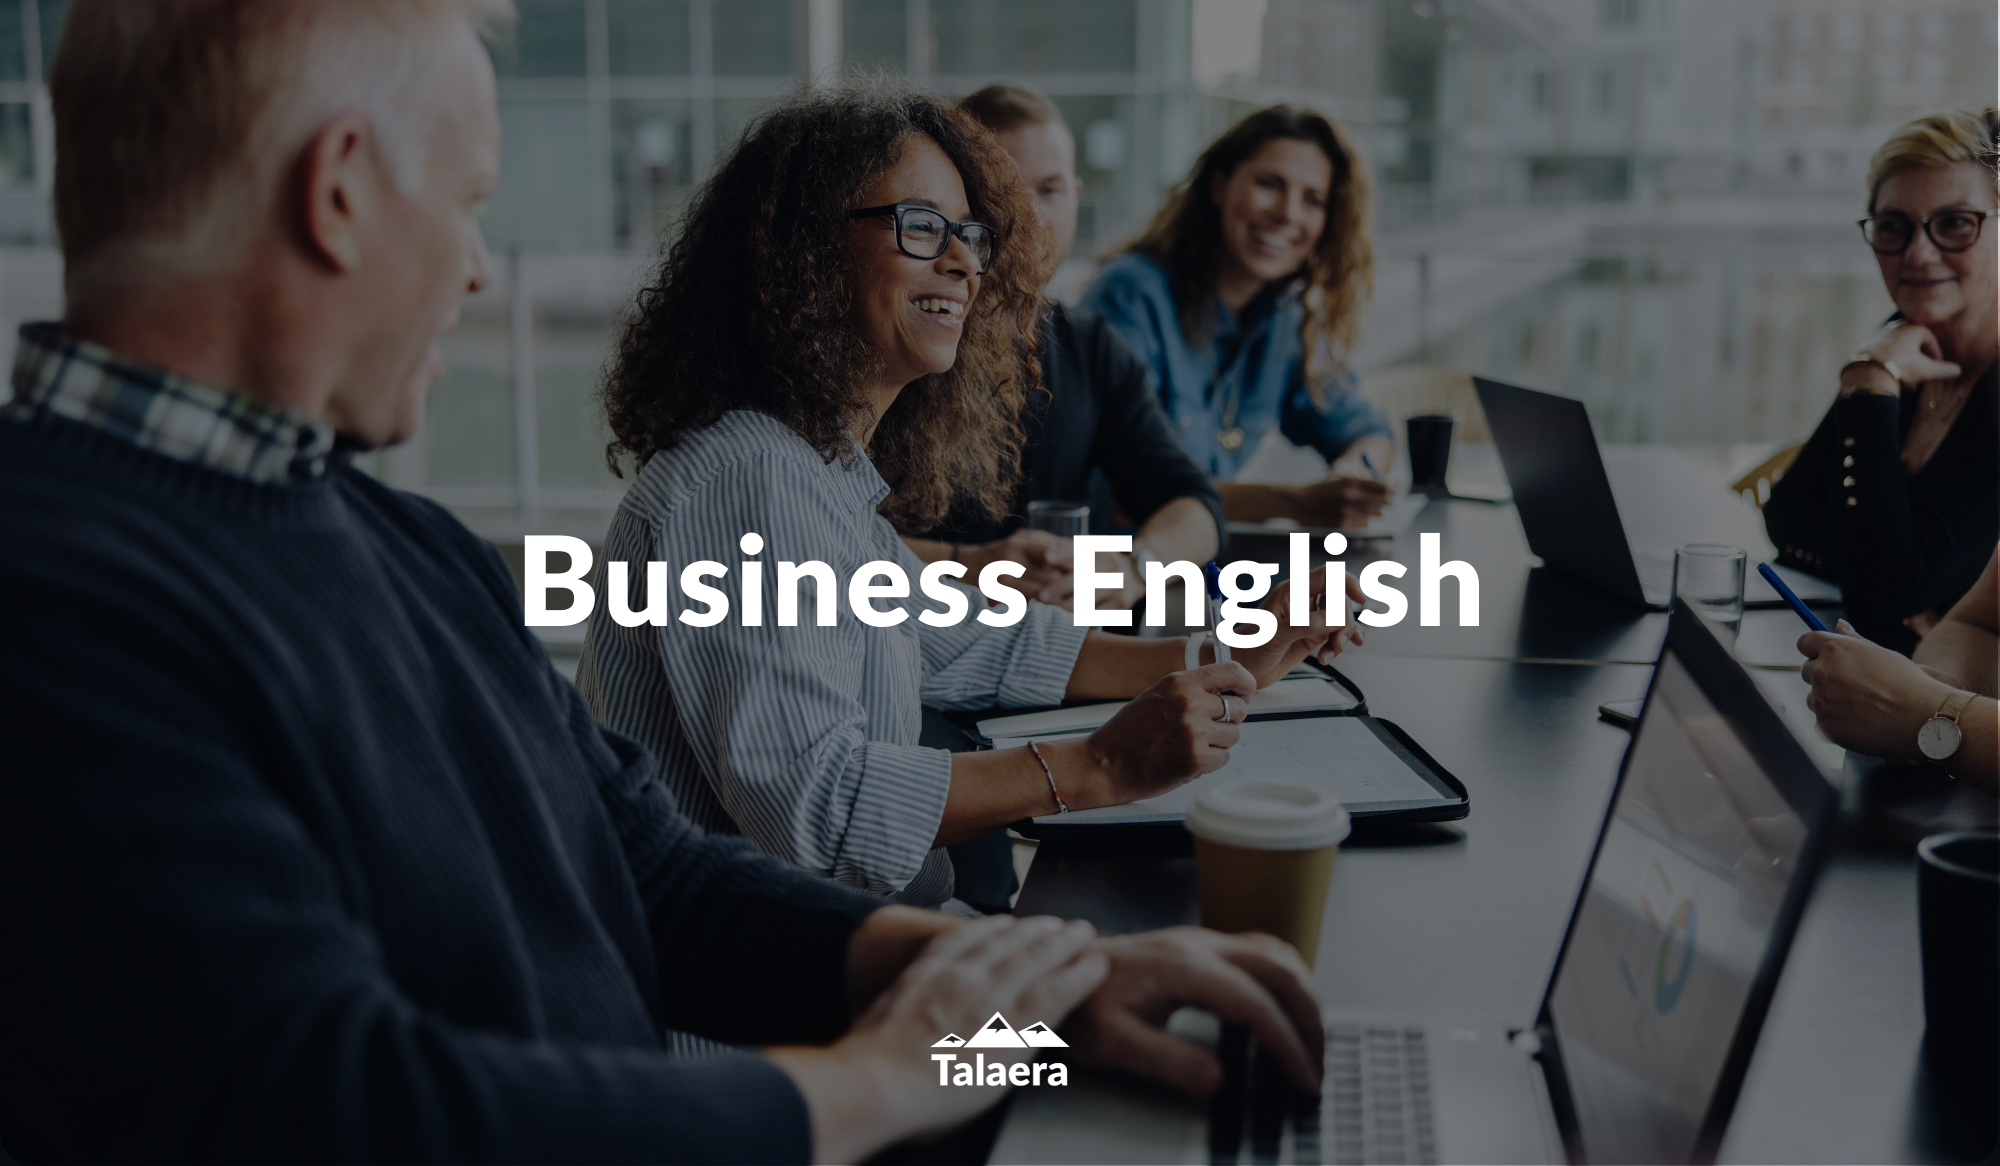 Your business English training with Open English